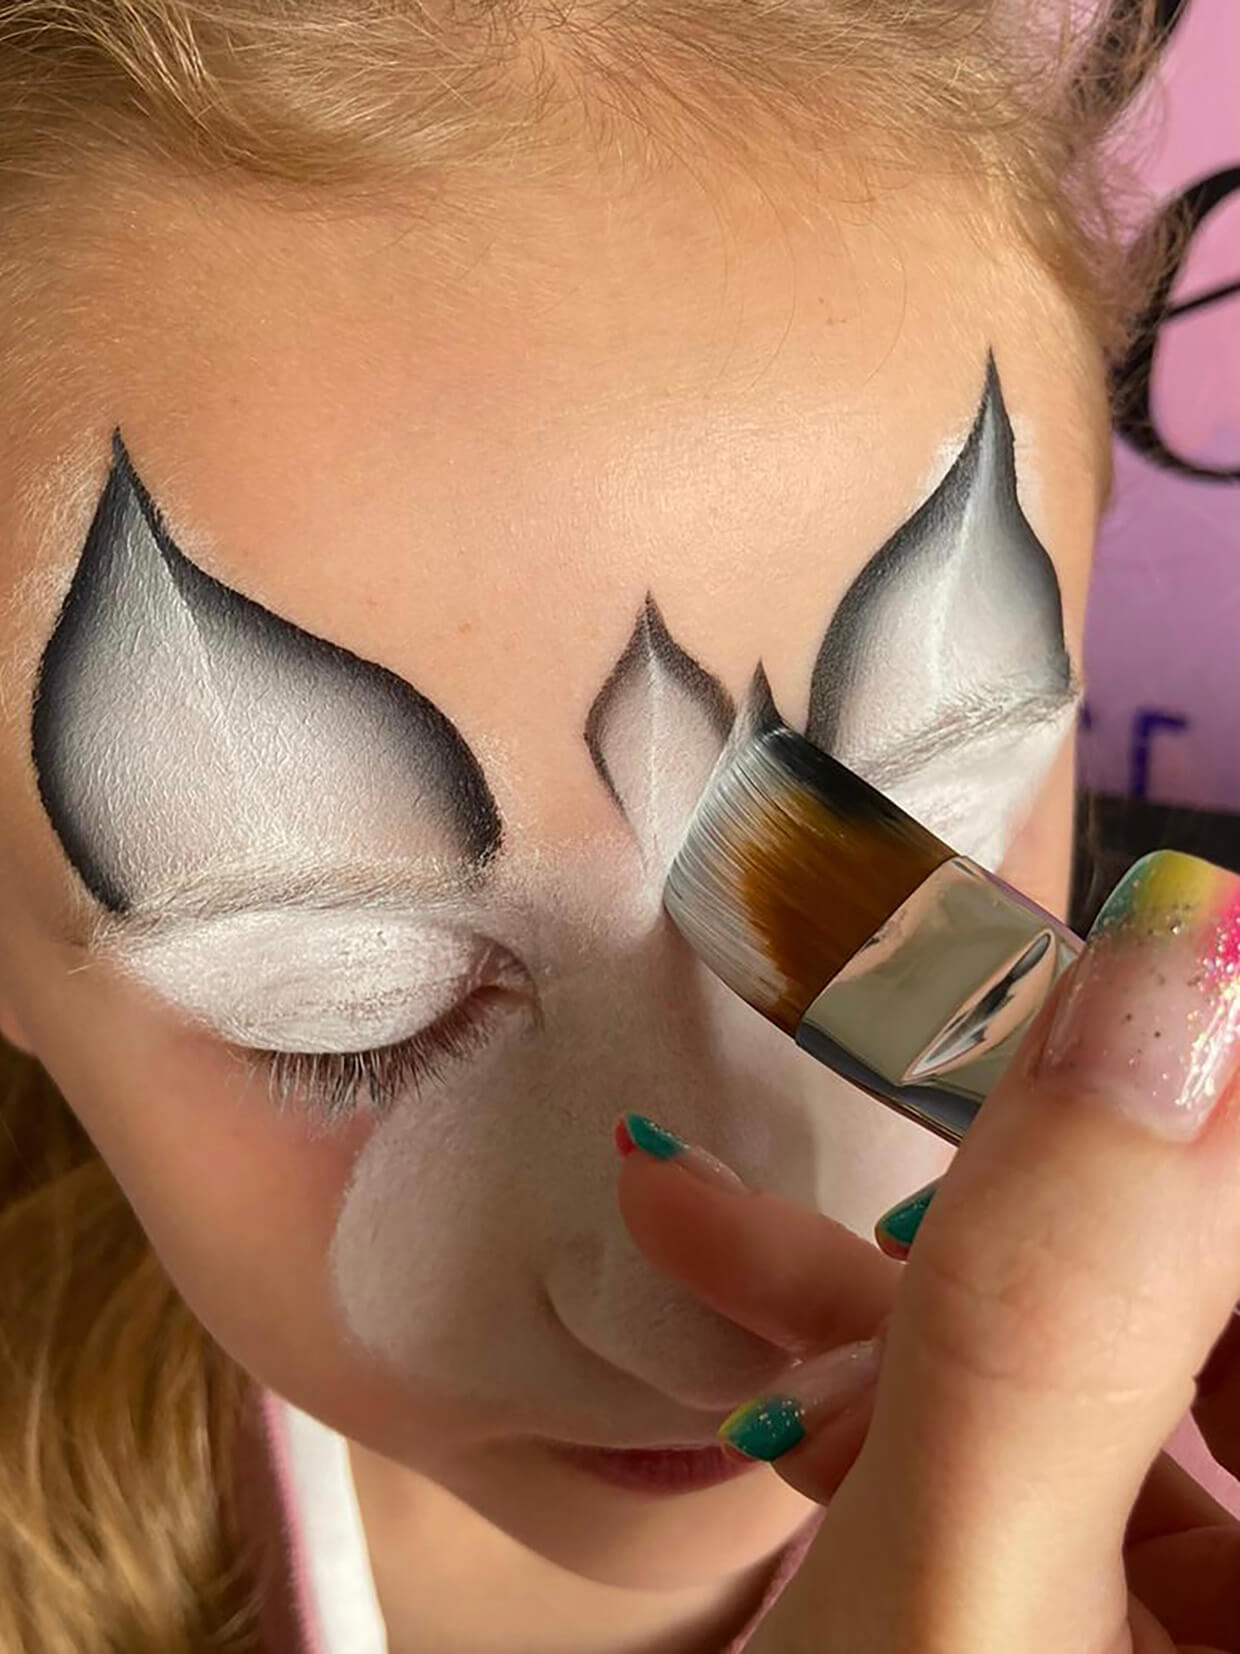 How to do cat face paint